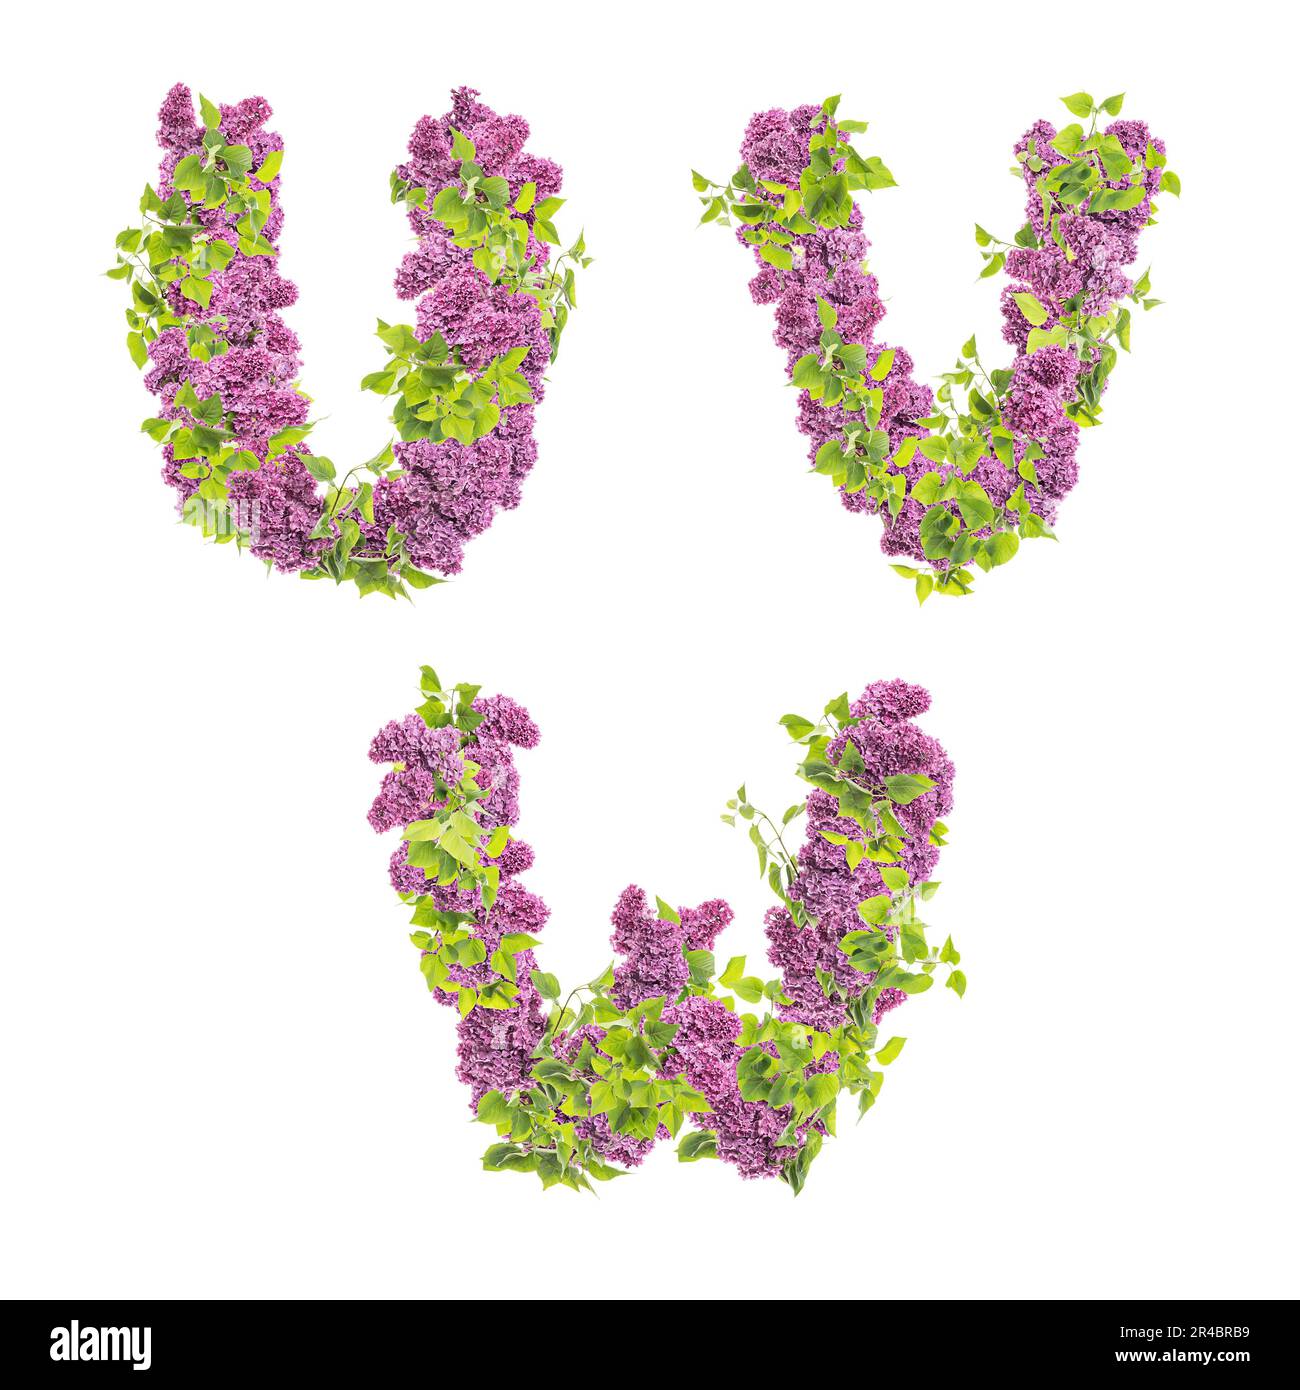 3D rendering of Lilac flowers capital letters alphabet - letters U-W Stock Photo